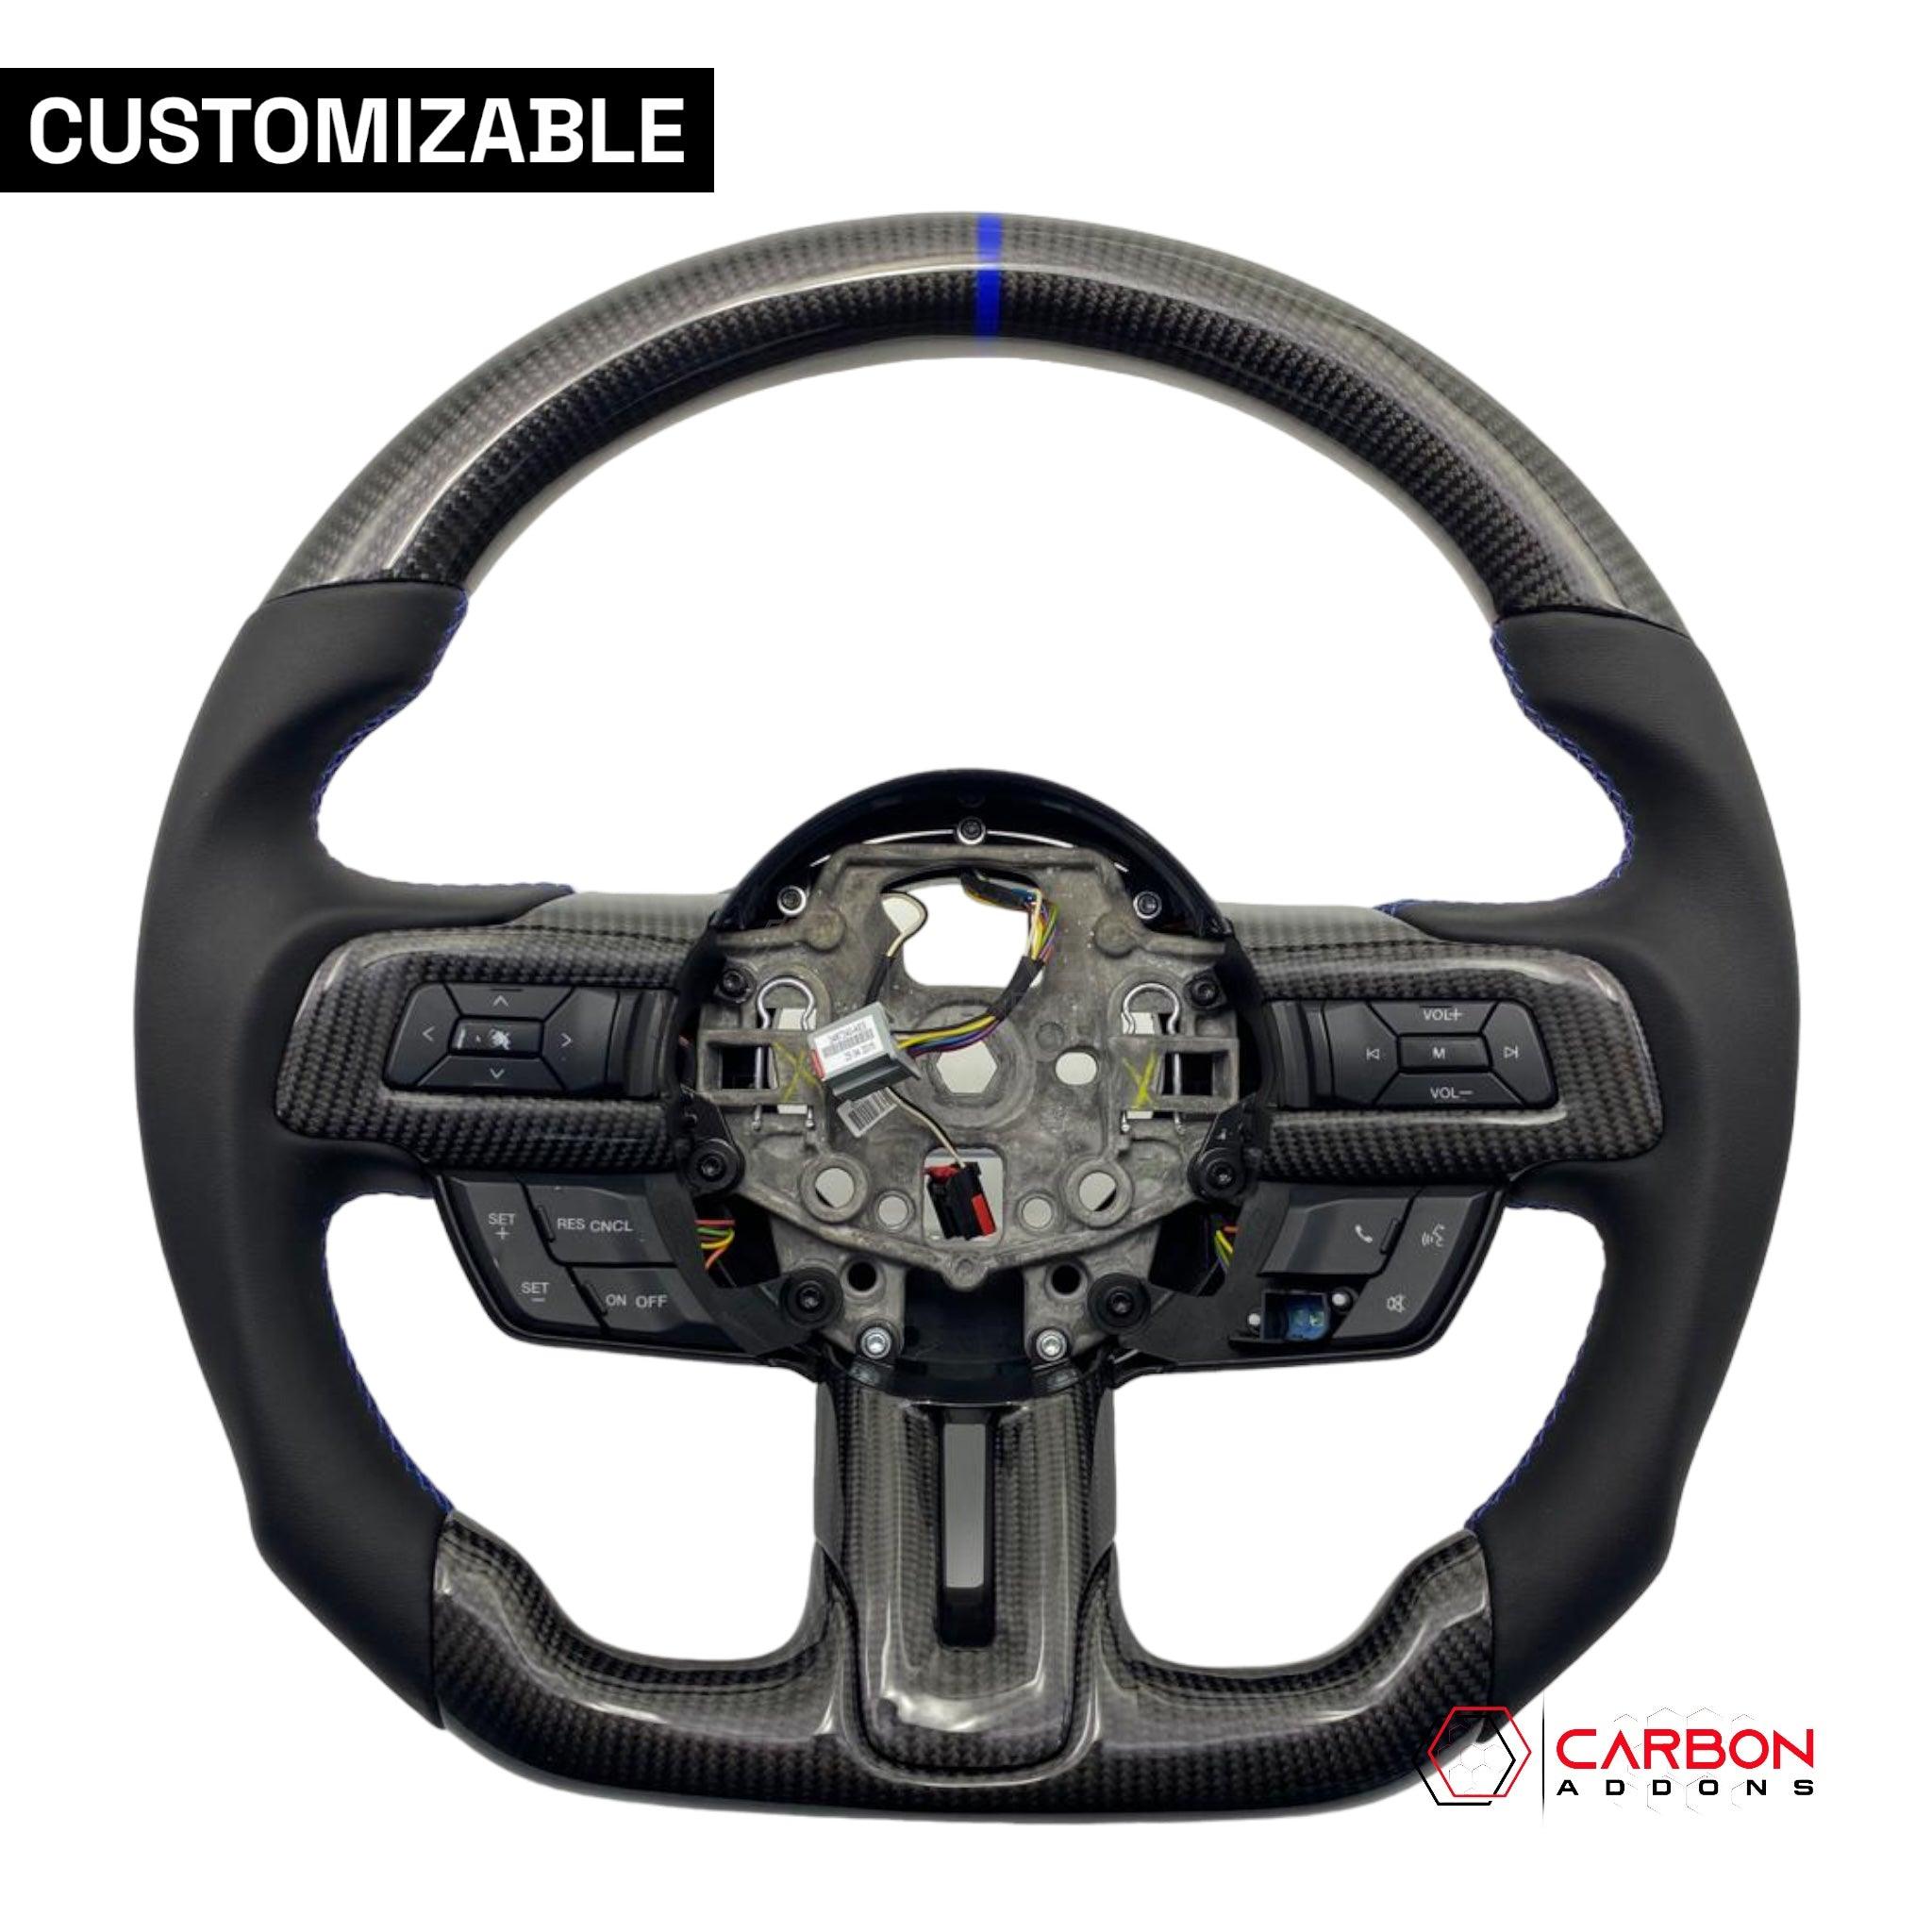 [Complete/Heated] Custom Carbon Fiber Steering Wheel for 2015-2023 Ford Mustang - carbonaddons Carbon Fiber Parts, Accessories, Upgrades, Mods